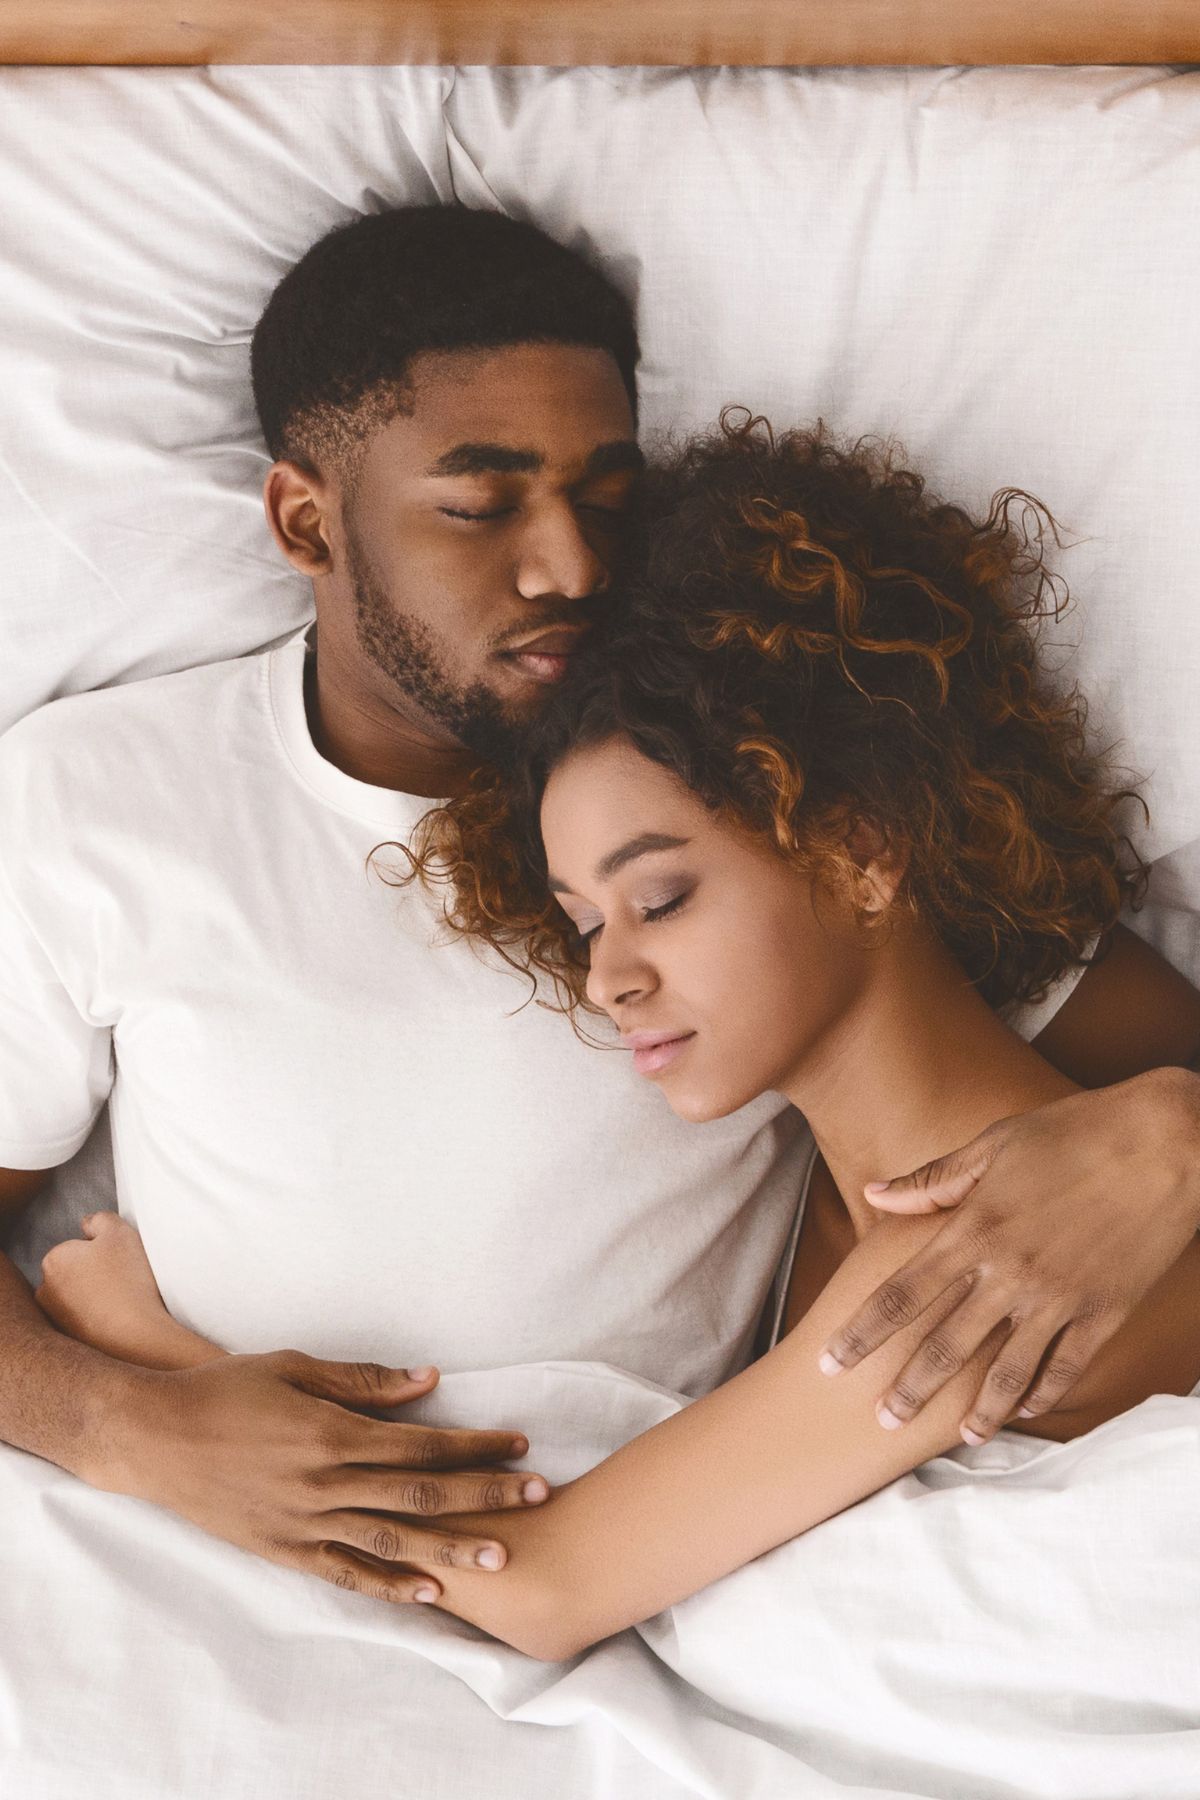 Have you heard of National Situationship Day? If not, here are 5